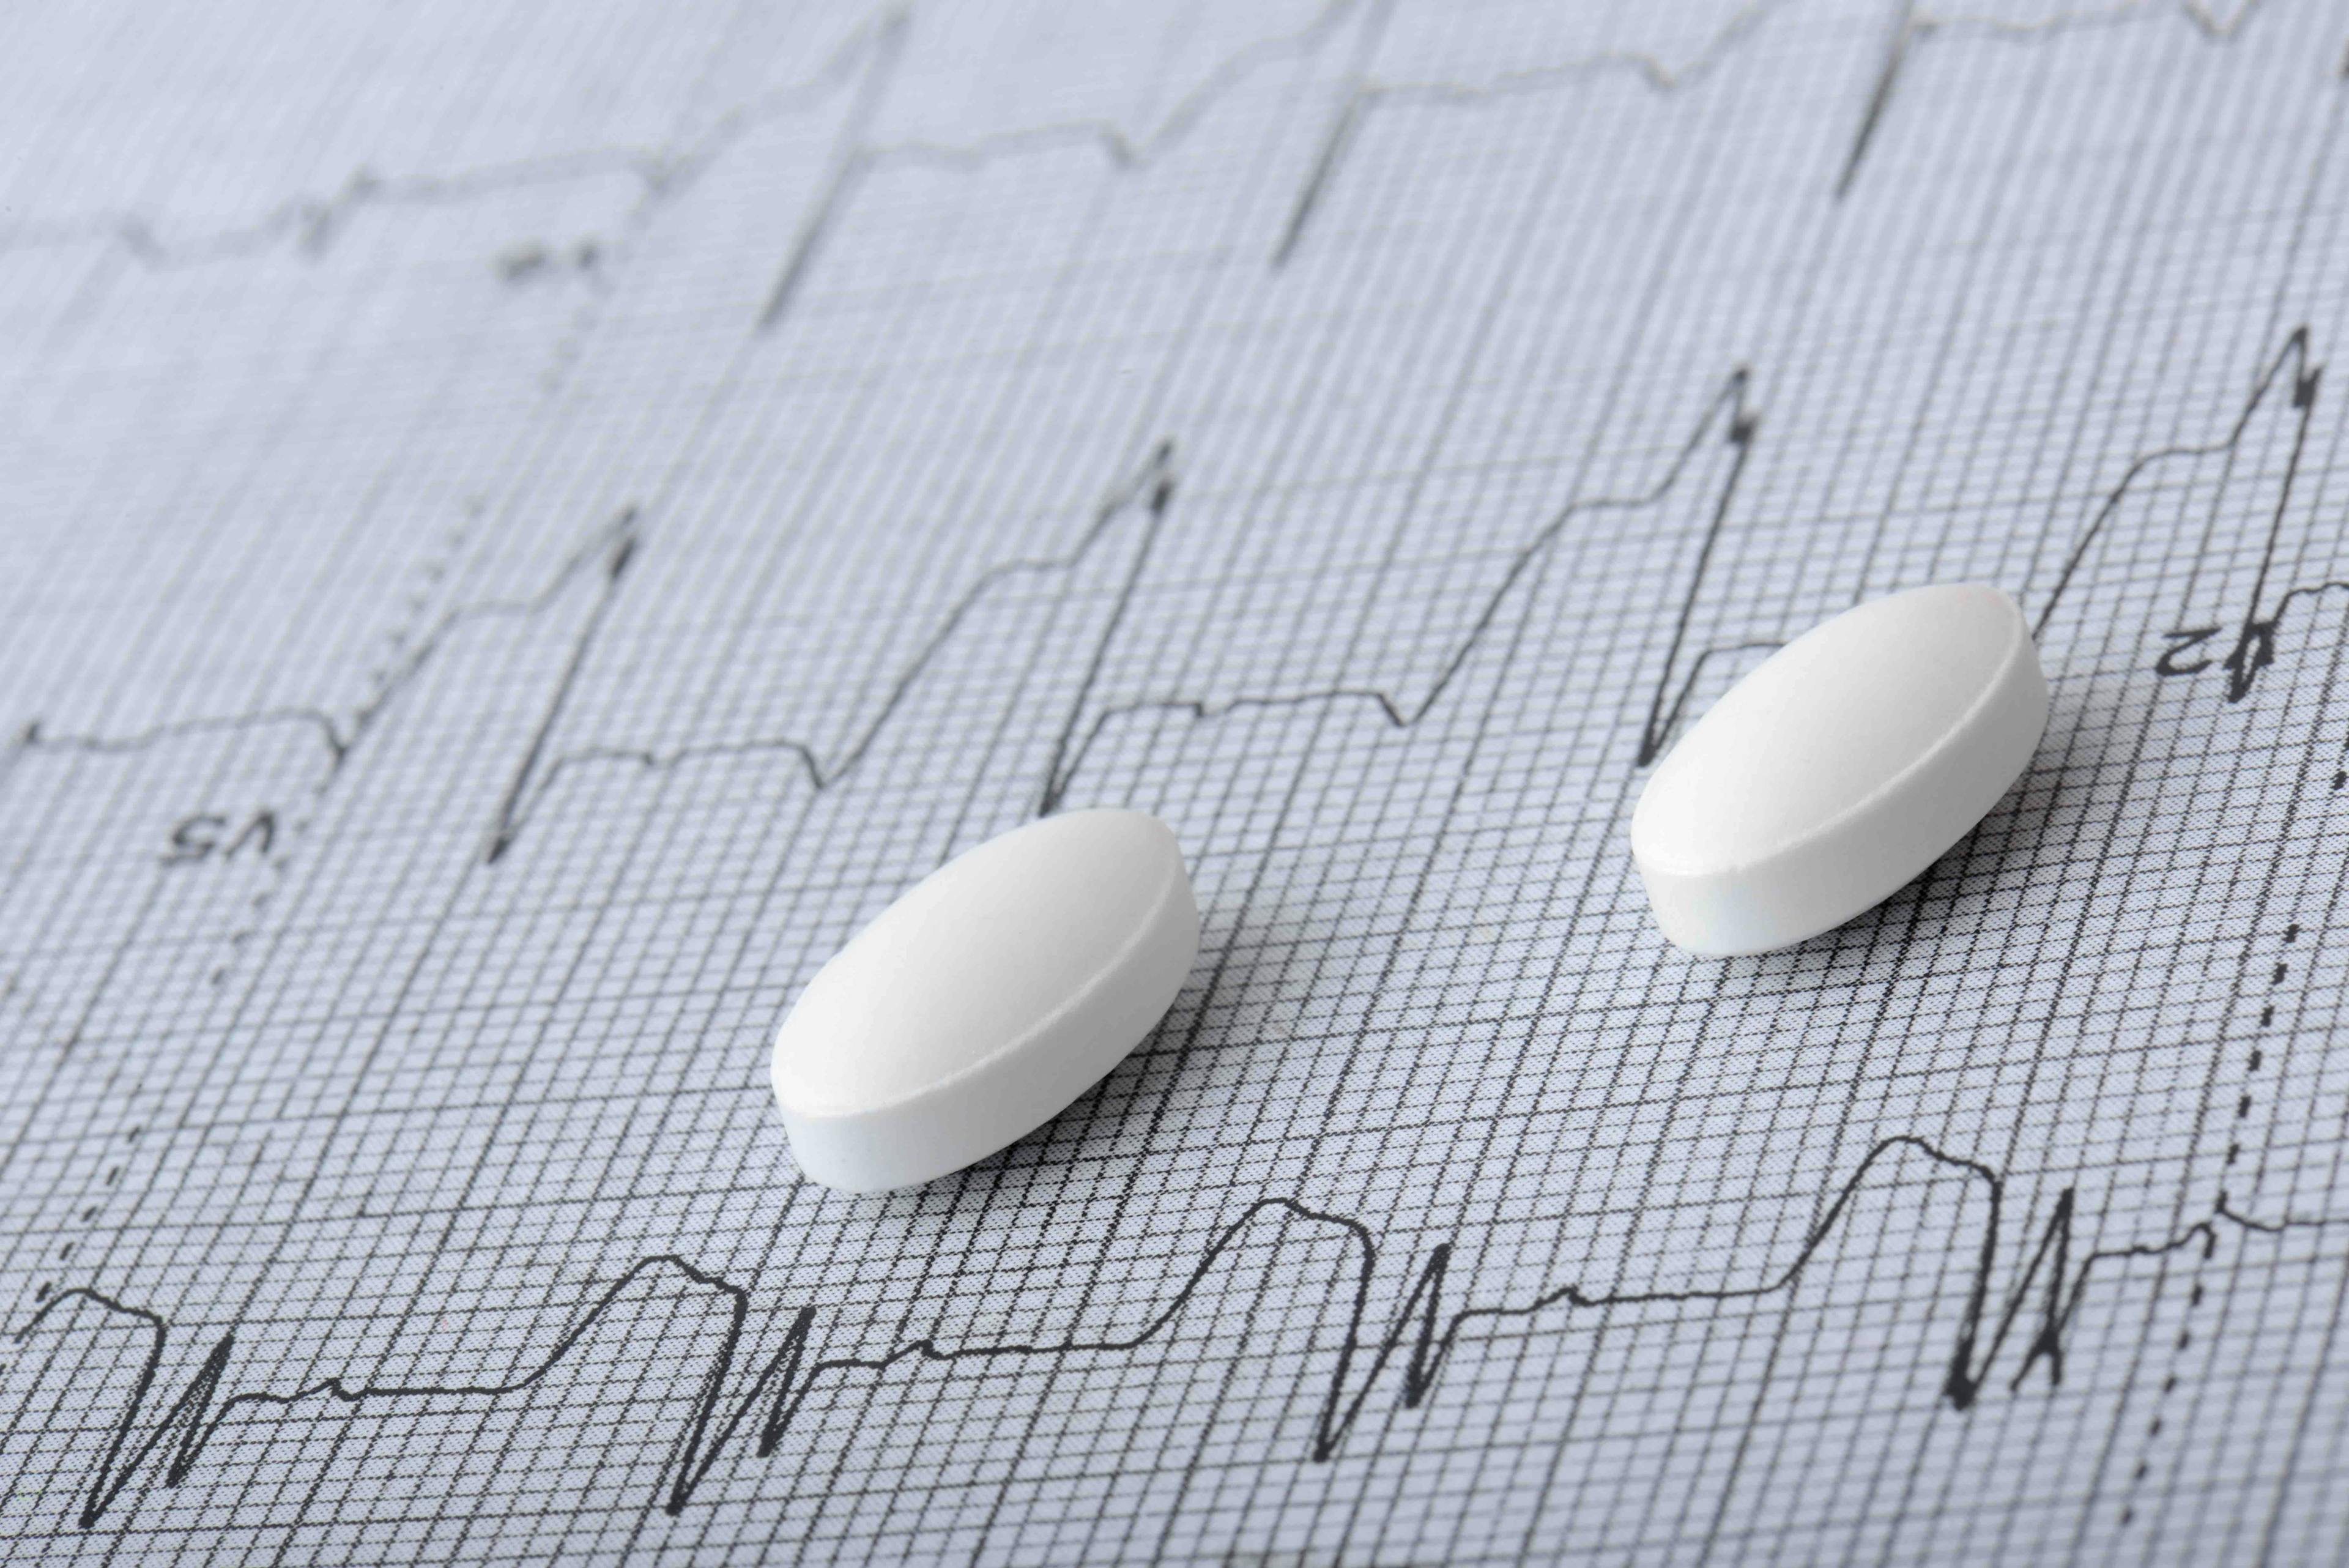 Study: Statins May Cause Myalgia in Some Patients